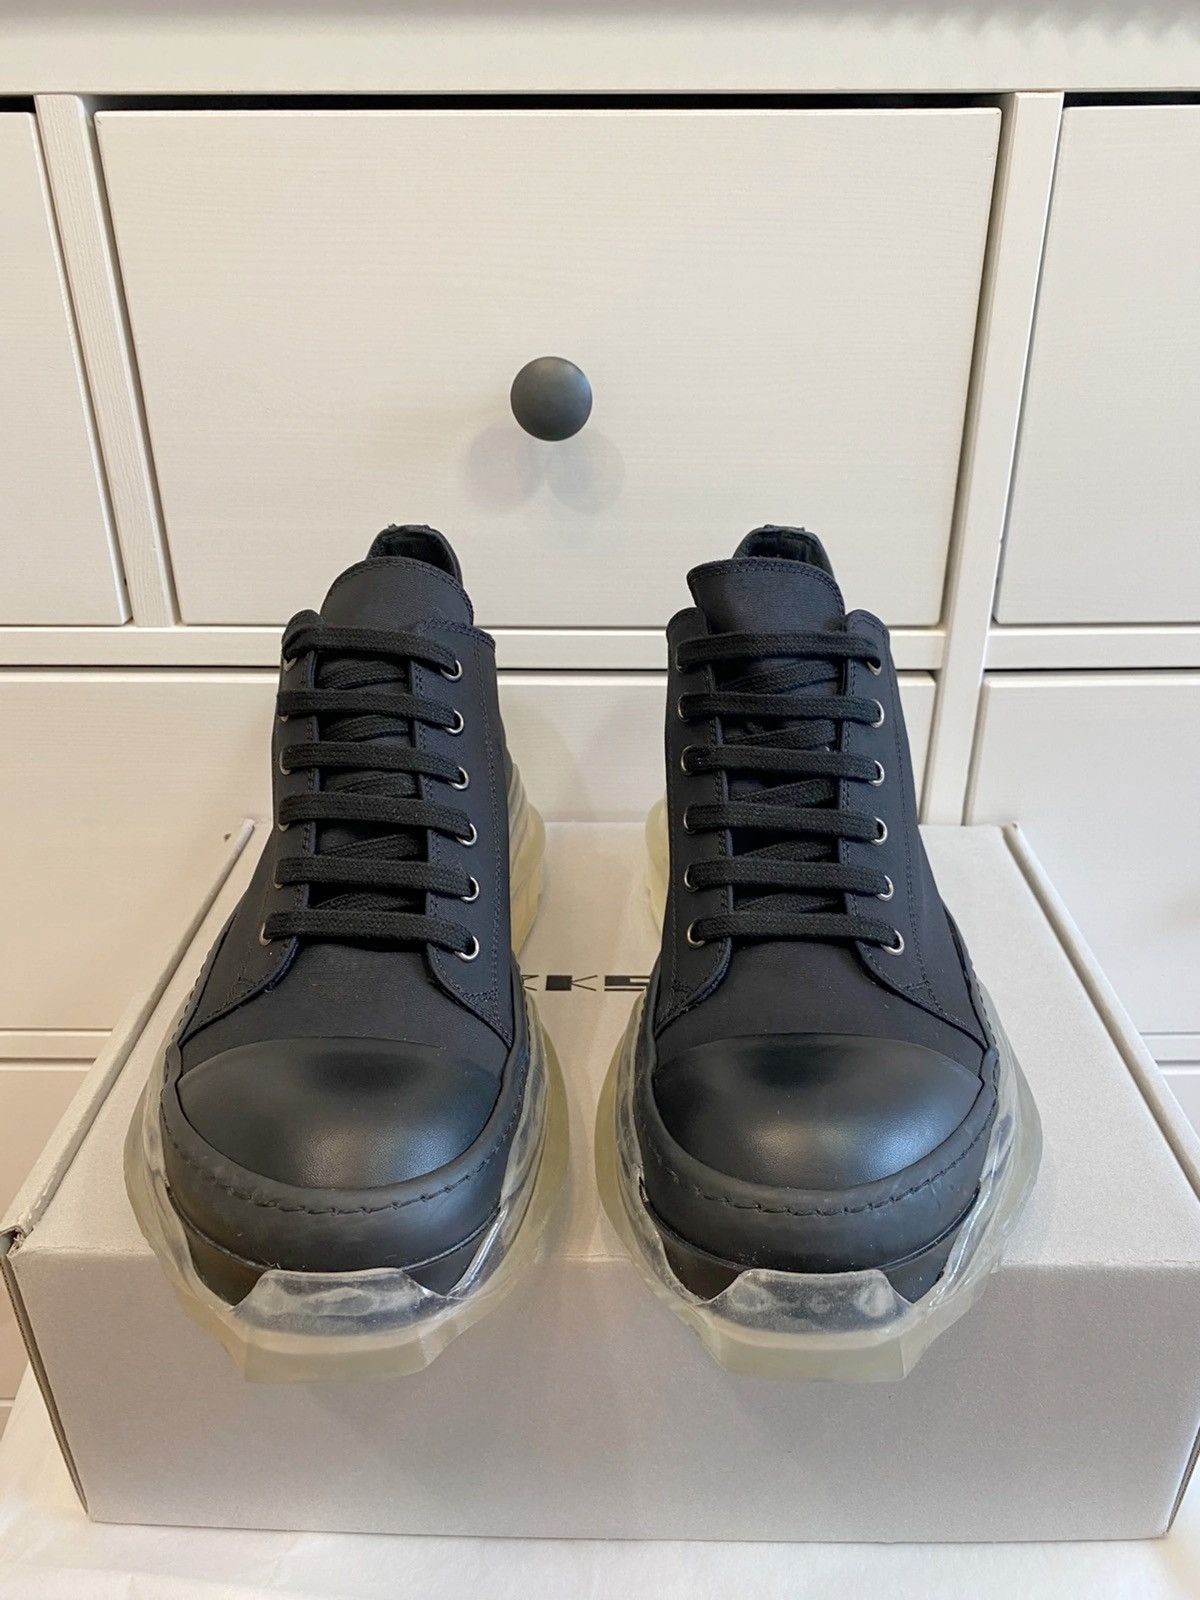 Rick Owens Ramones Abstract Clear Sole | Grailed